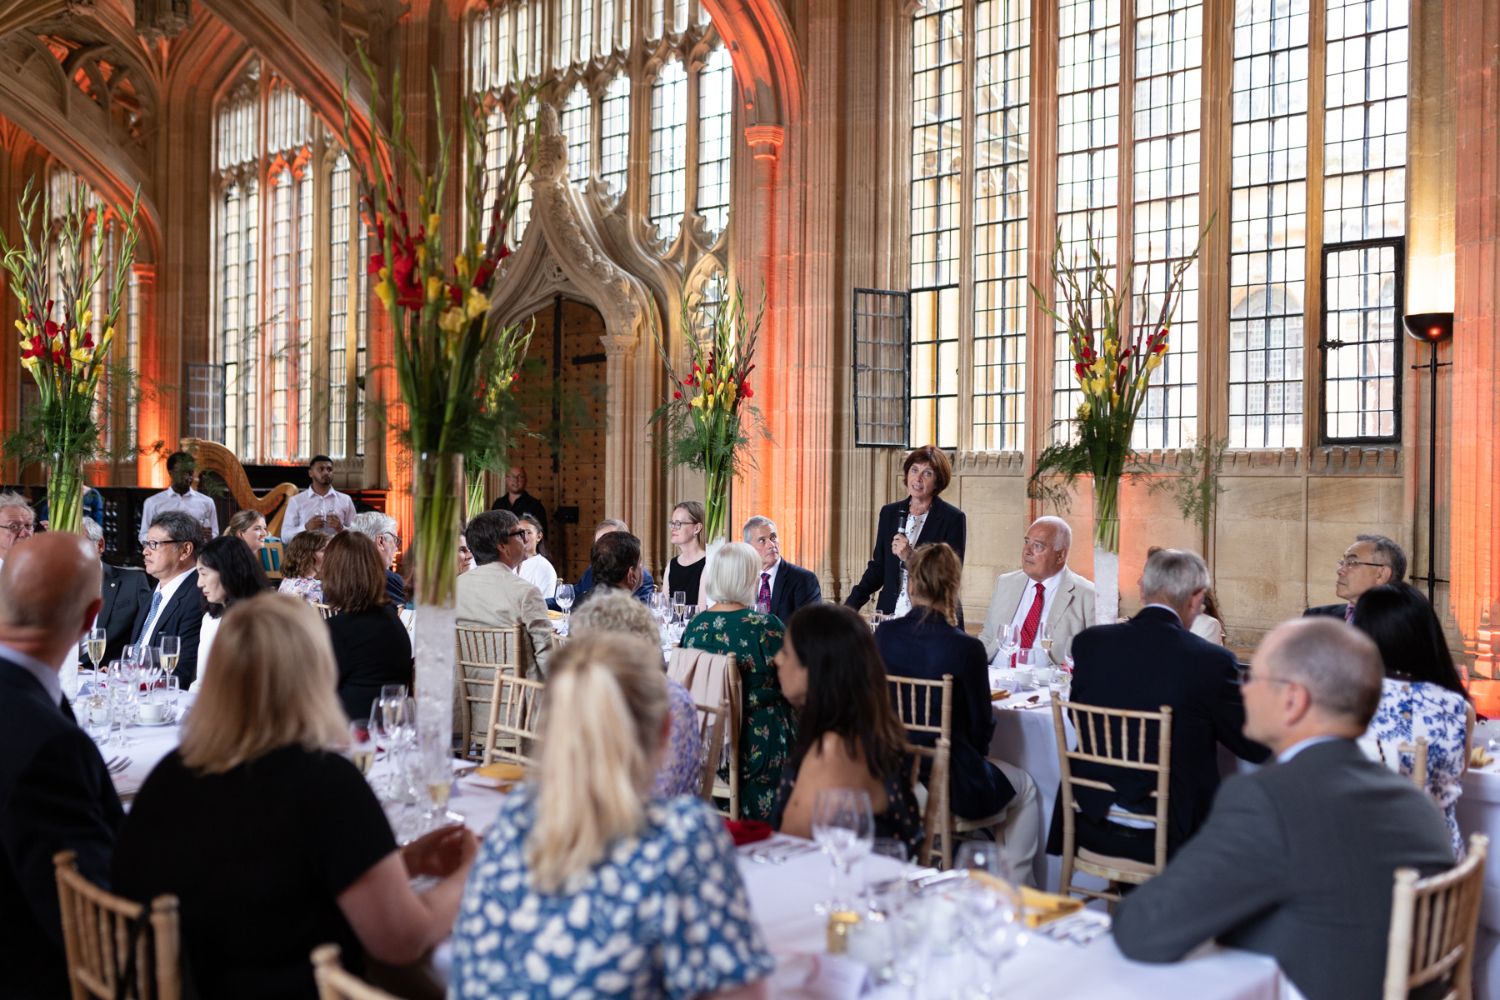 <p>Vice-Chancellor Professor Louise Richardson gives a talk at the Divinity School dinner</p>

<p><span class="reduce_font_size"><em>Image credit: Cyrus Mower Photography</em></span></p>
